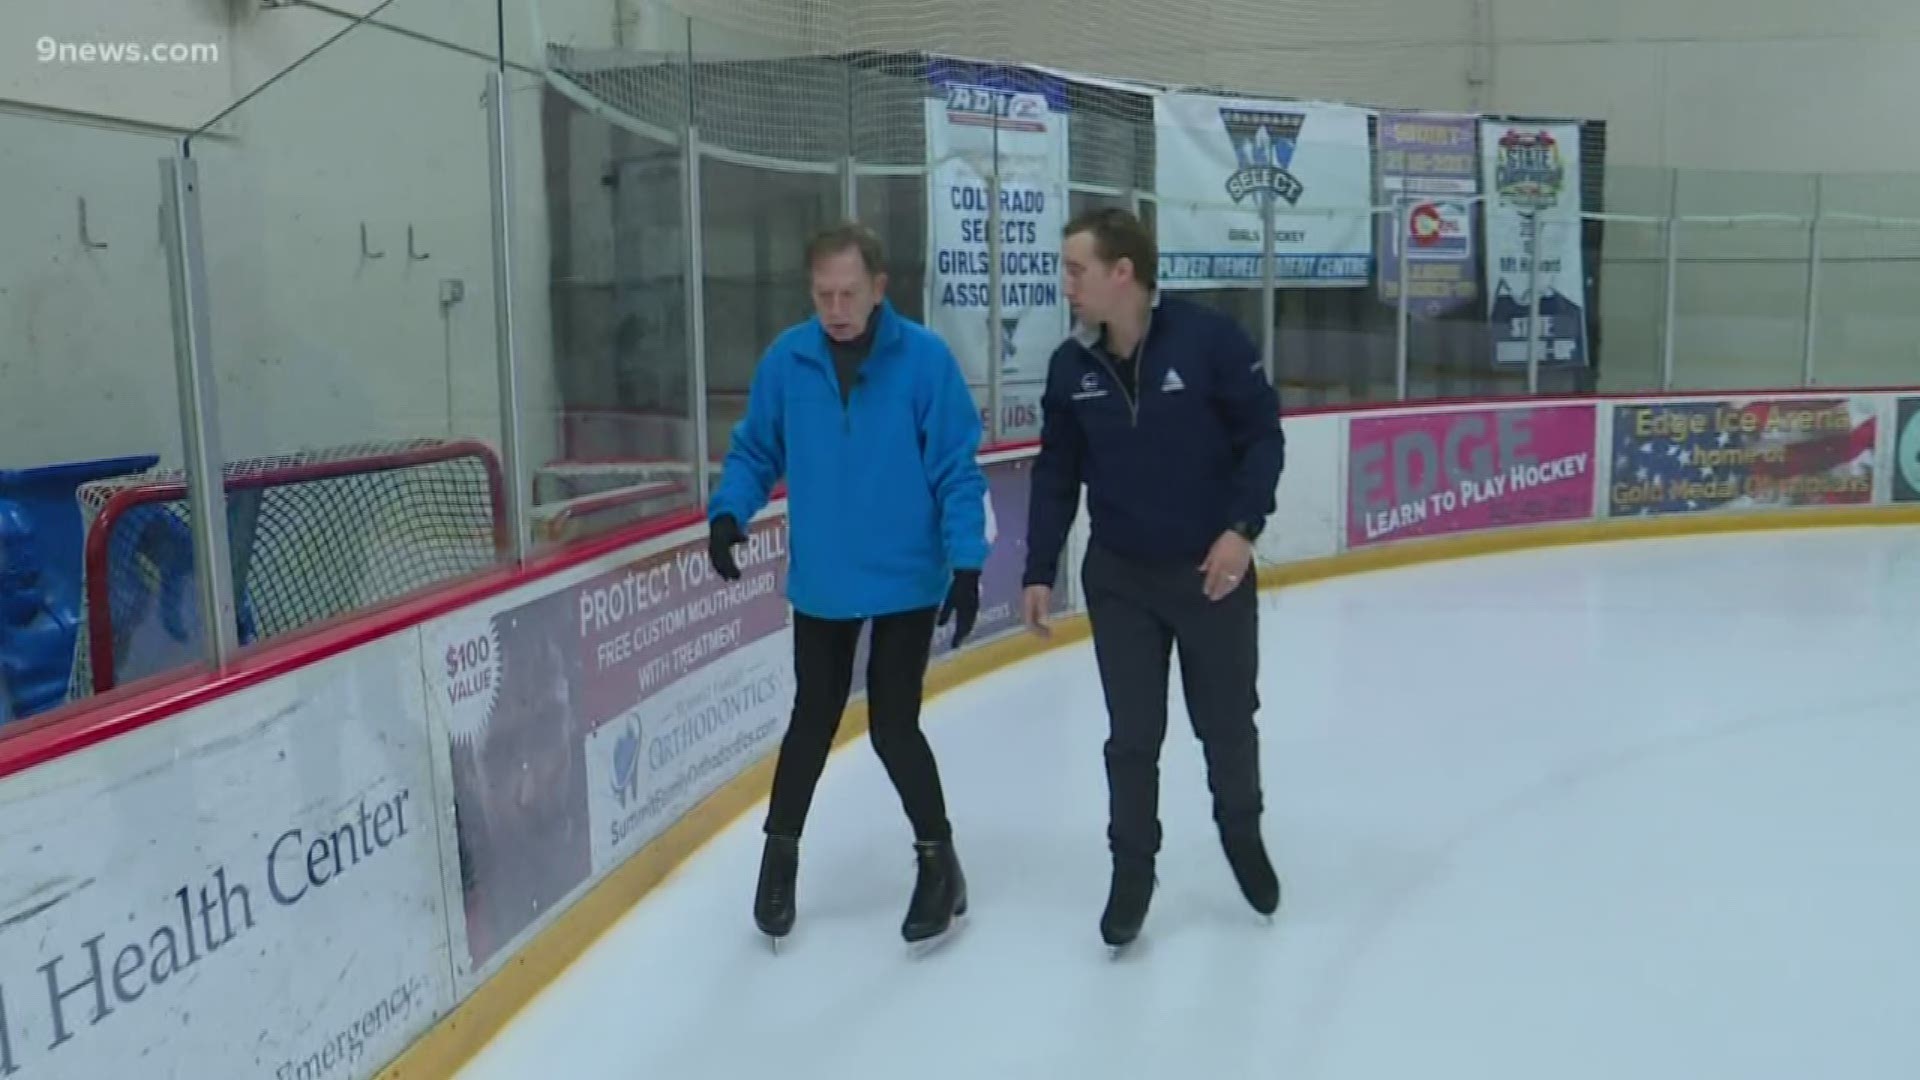 Our gardening guru Rob Proctor has always loved ice skating. Now in his 60s, Rob is learning to skate himself.